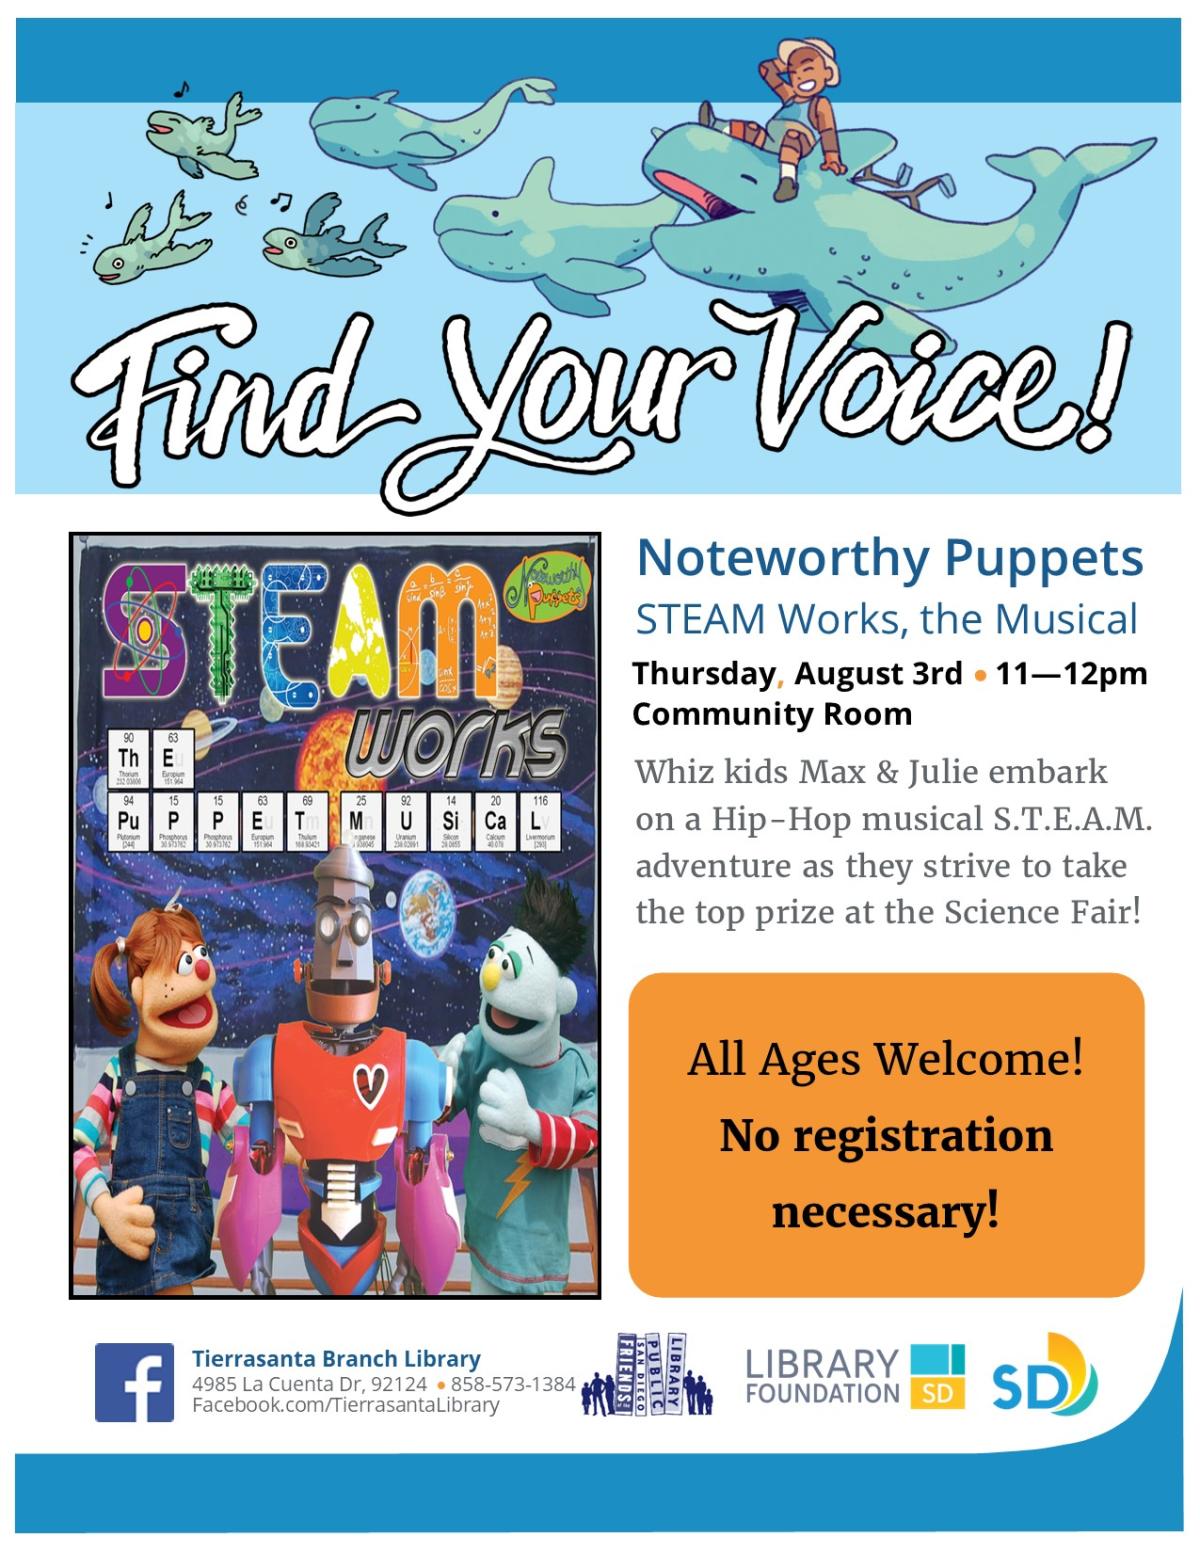 Flyer with the image of puppets and a robot